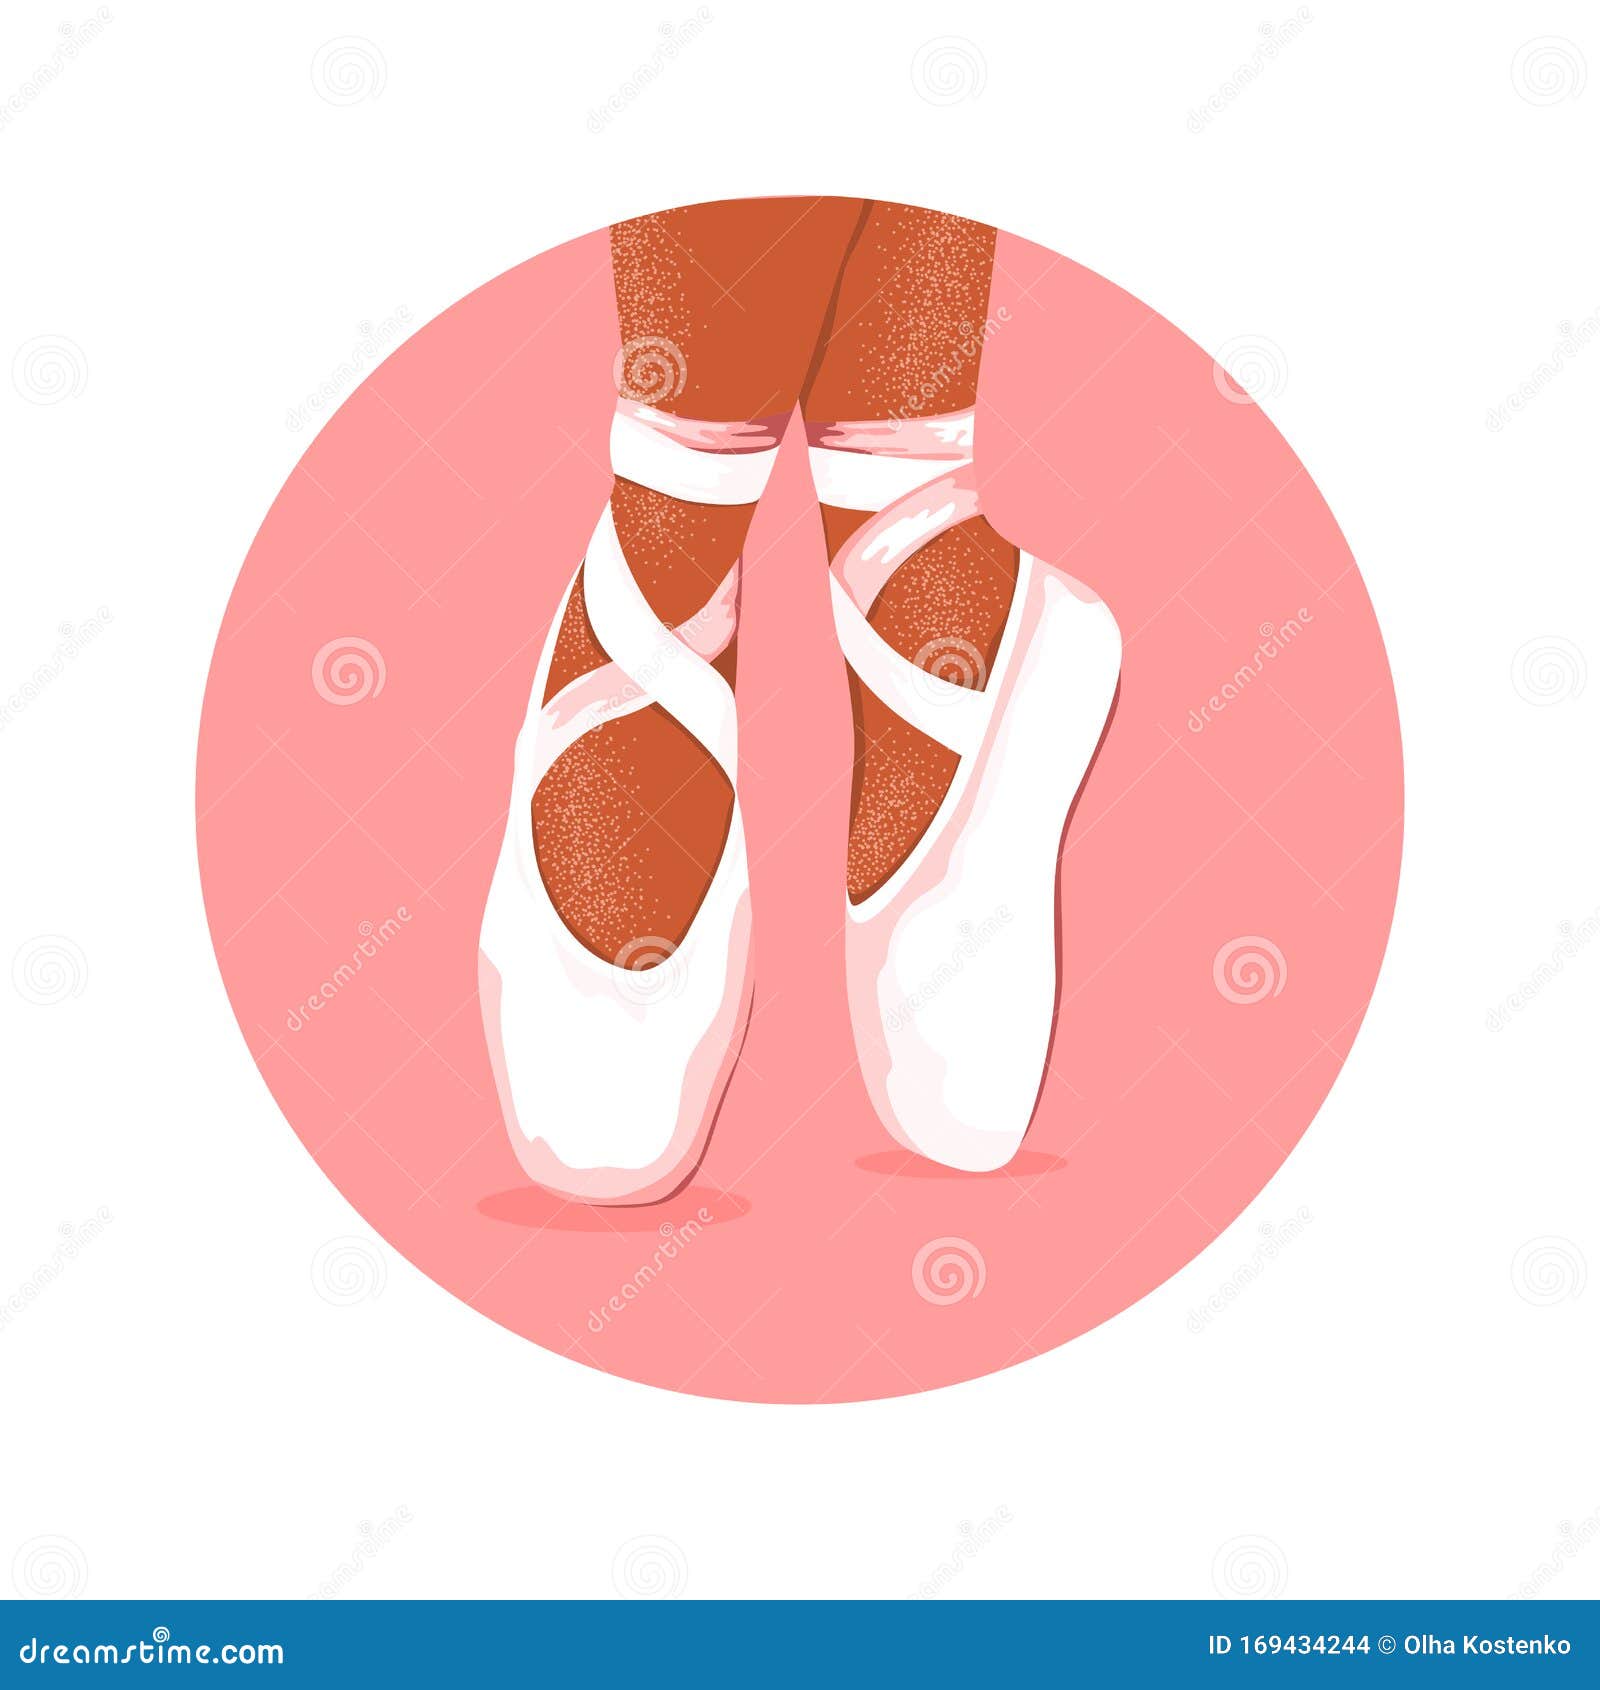 Isolated Ballerina Pointe Shoes Vector - Illustration class, 169434244